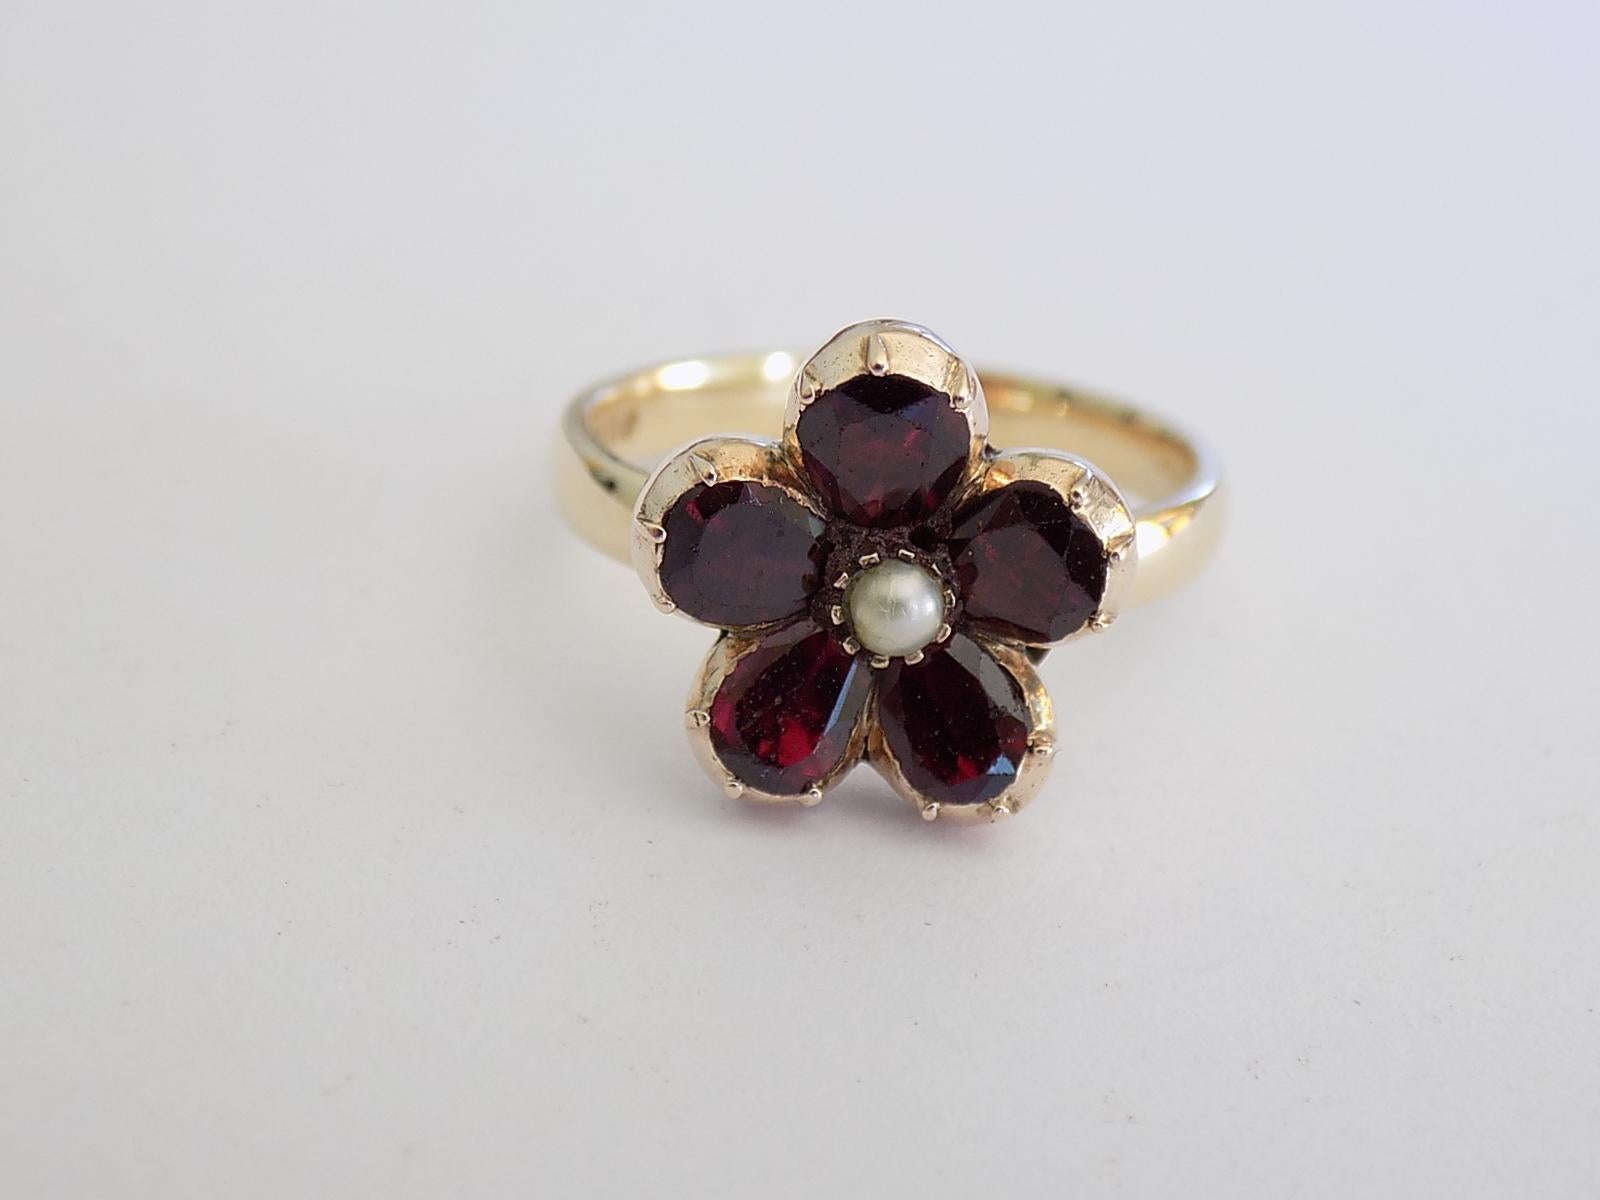 A Lovely Georgian c.1800 9 Carat Gold, Pearl and Garnet flower ring. The Garnet in foil closed back setting on later 9 Carat gold shank. English origin.
Size N UK, 7 US.
Height of the face 14mm.
Weight 3.7gr.
Hallmarked for 9 carat gold.